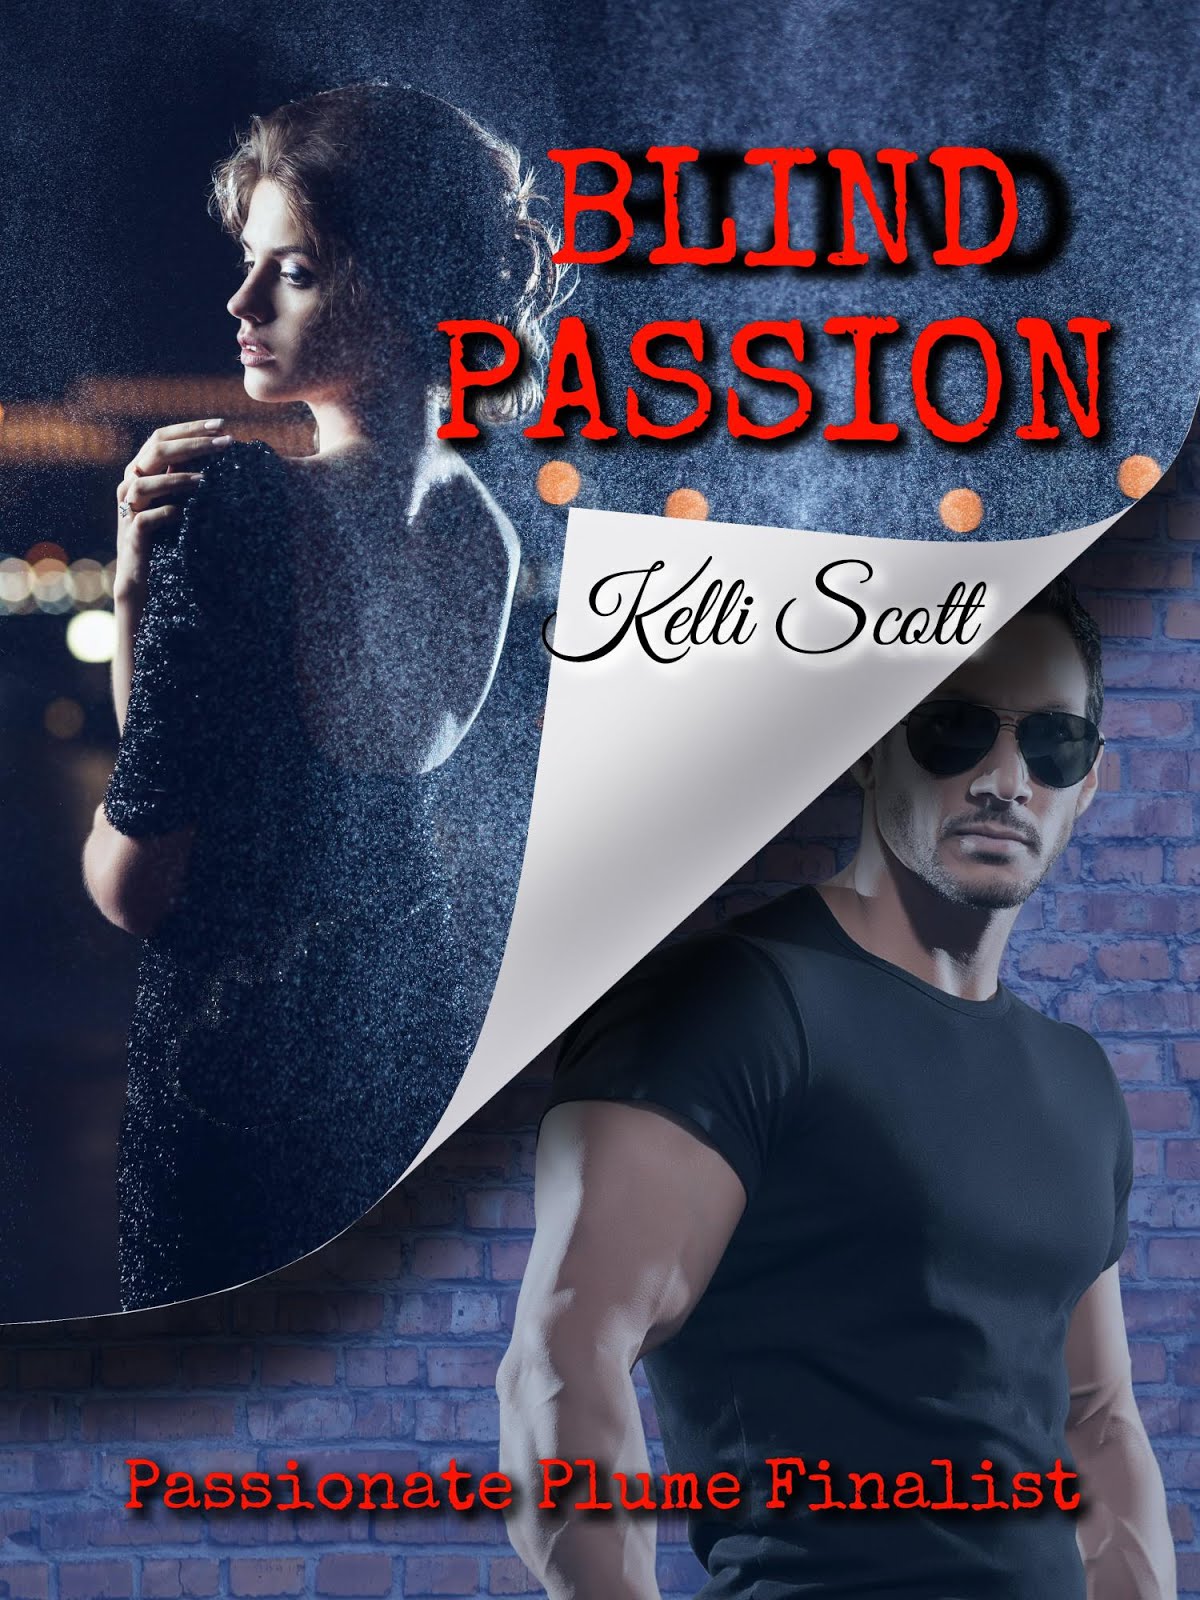 BLIND PASSION